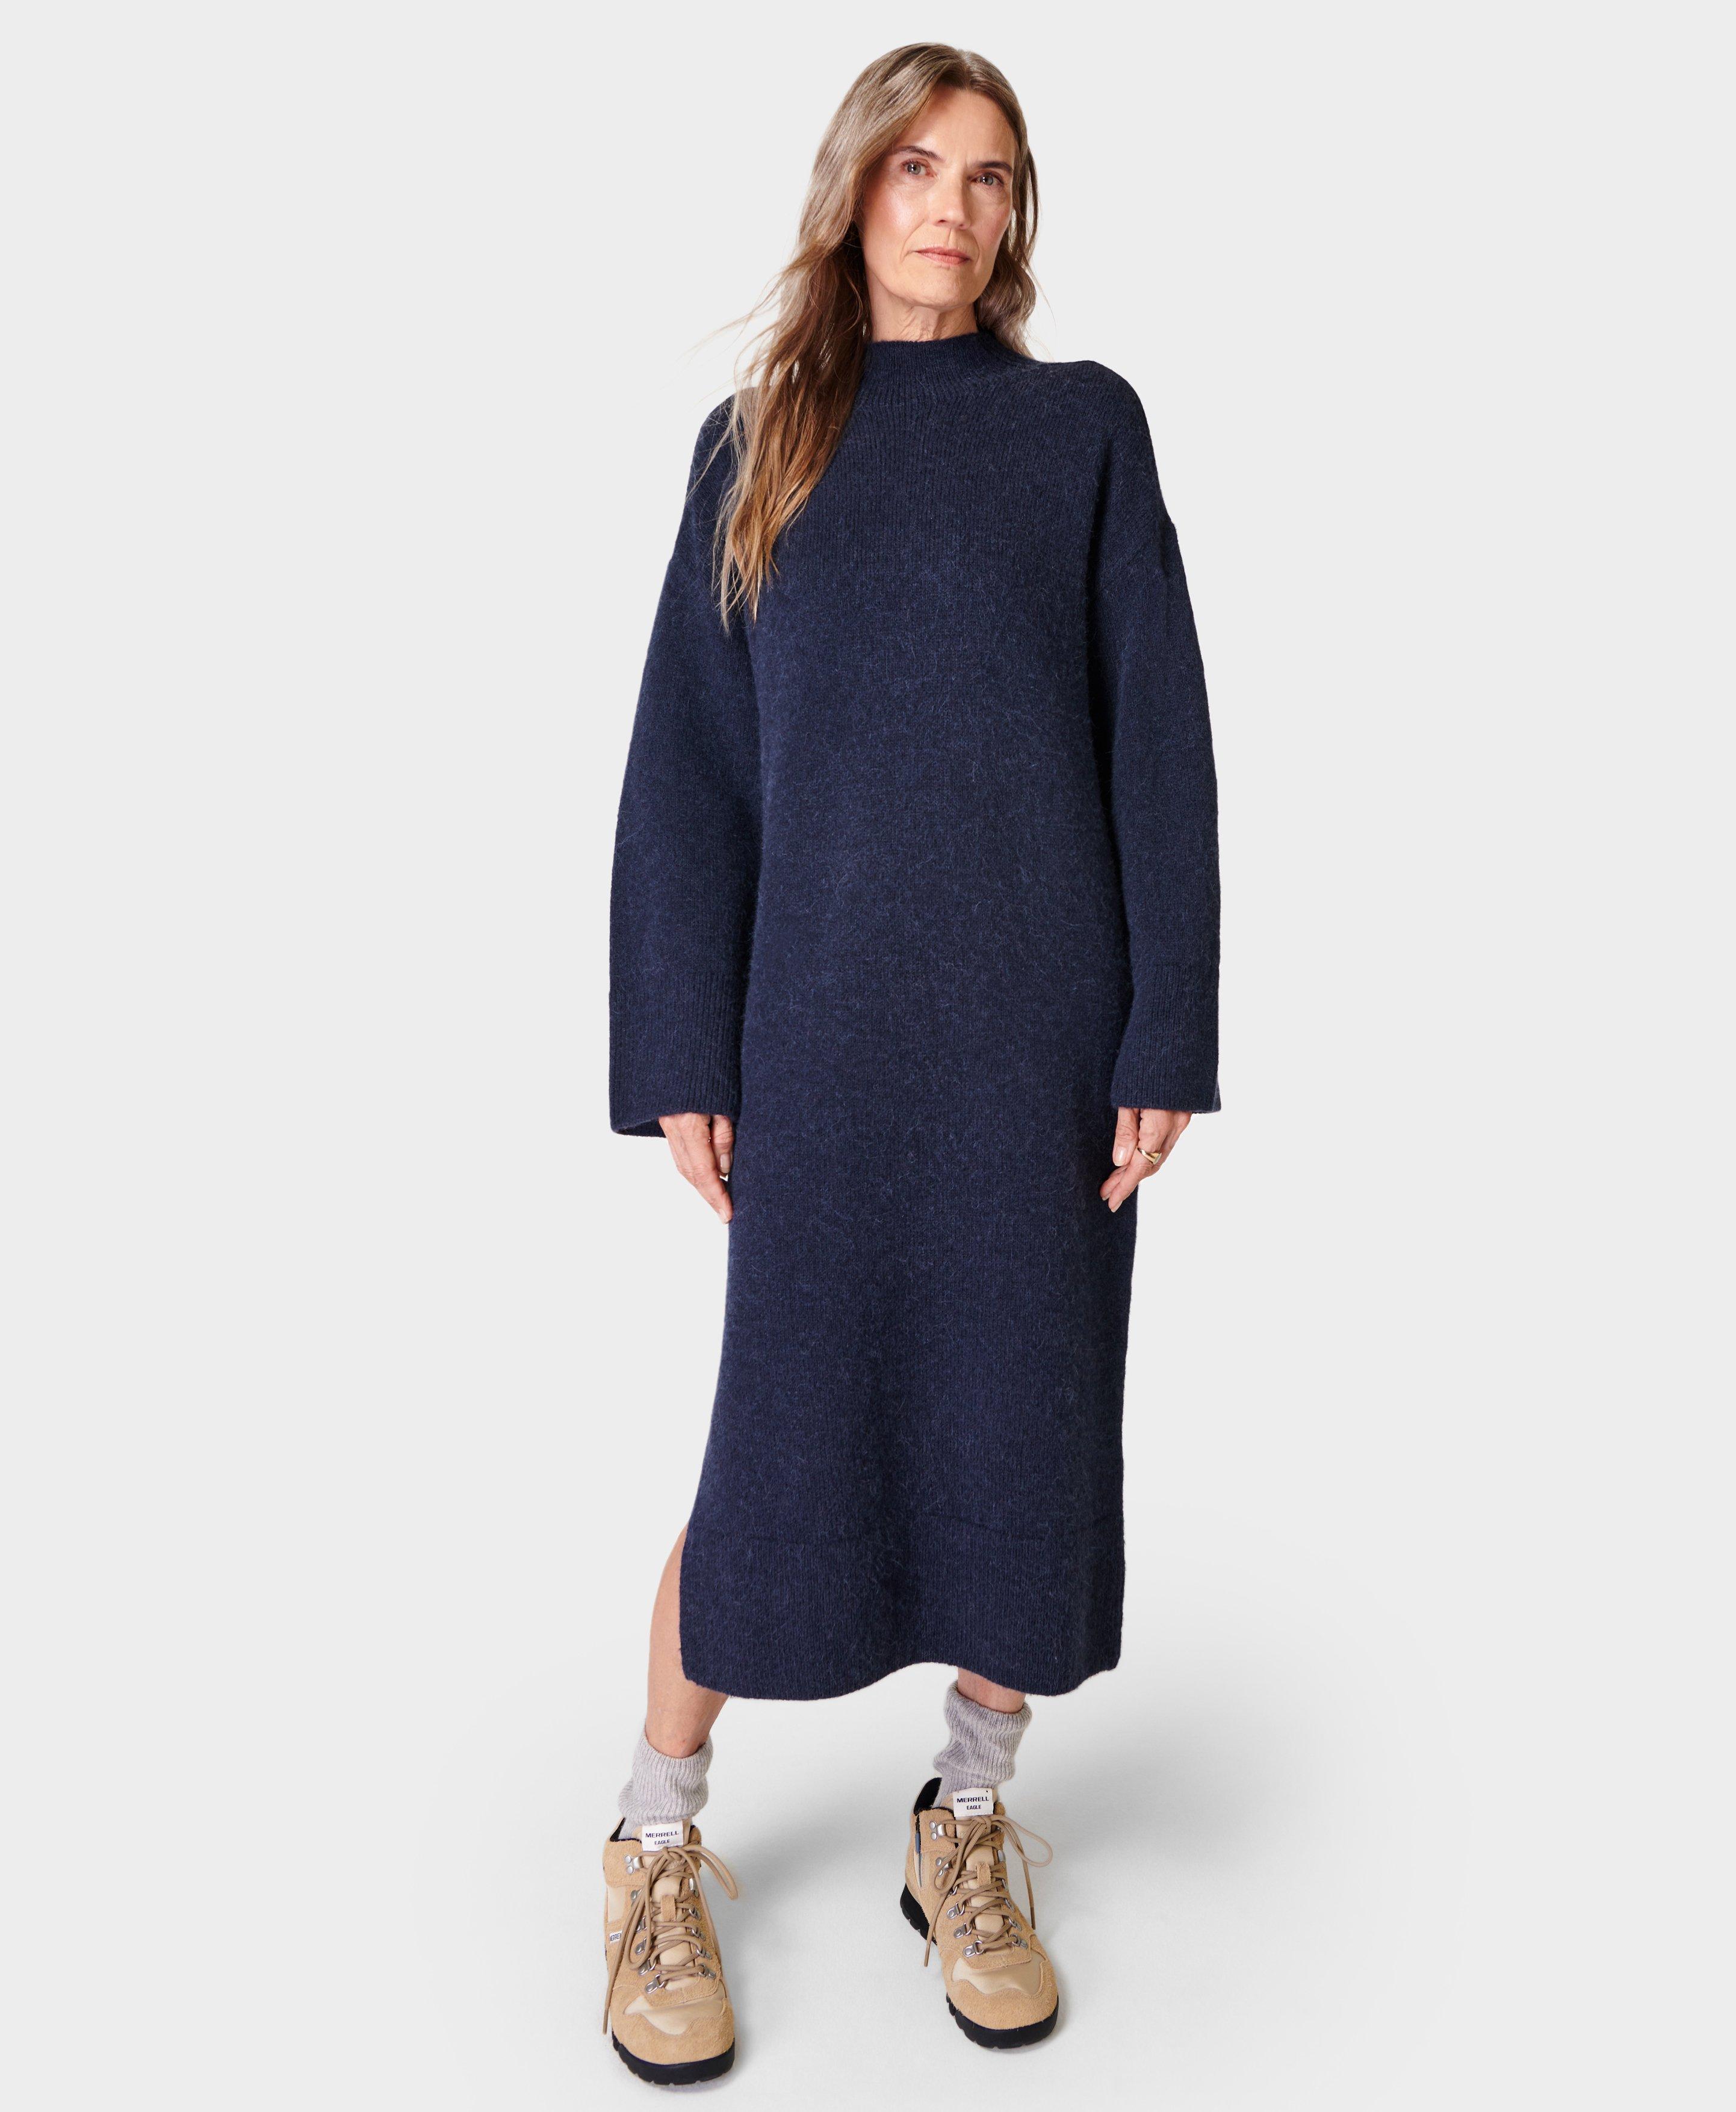 Pinnacle Wool Dress - Navy Blue | Women's Dresses and Jumpsuits ...